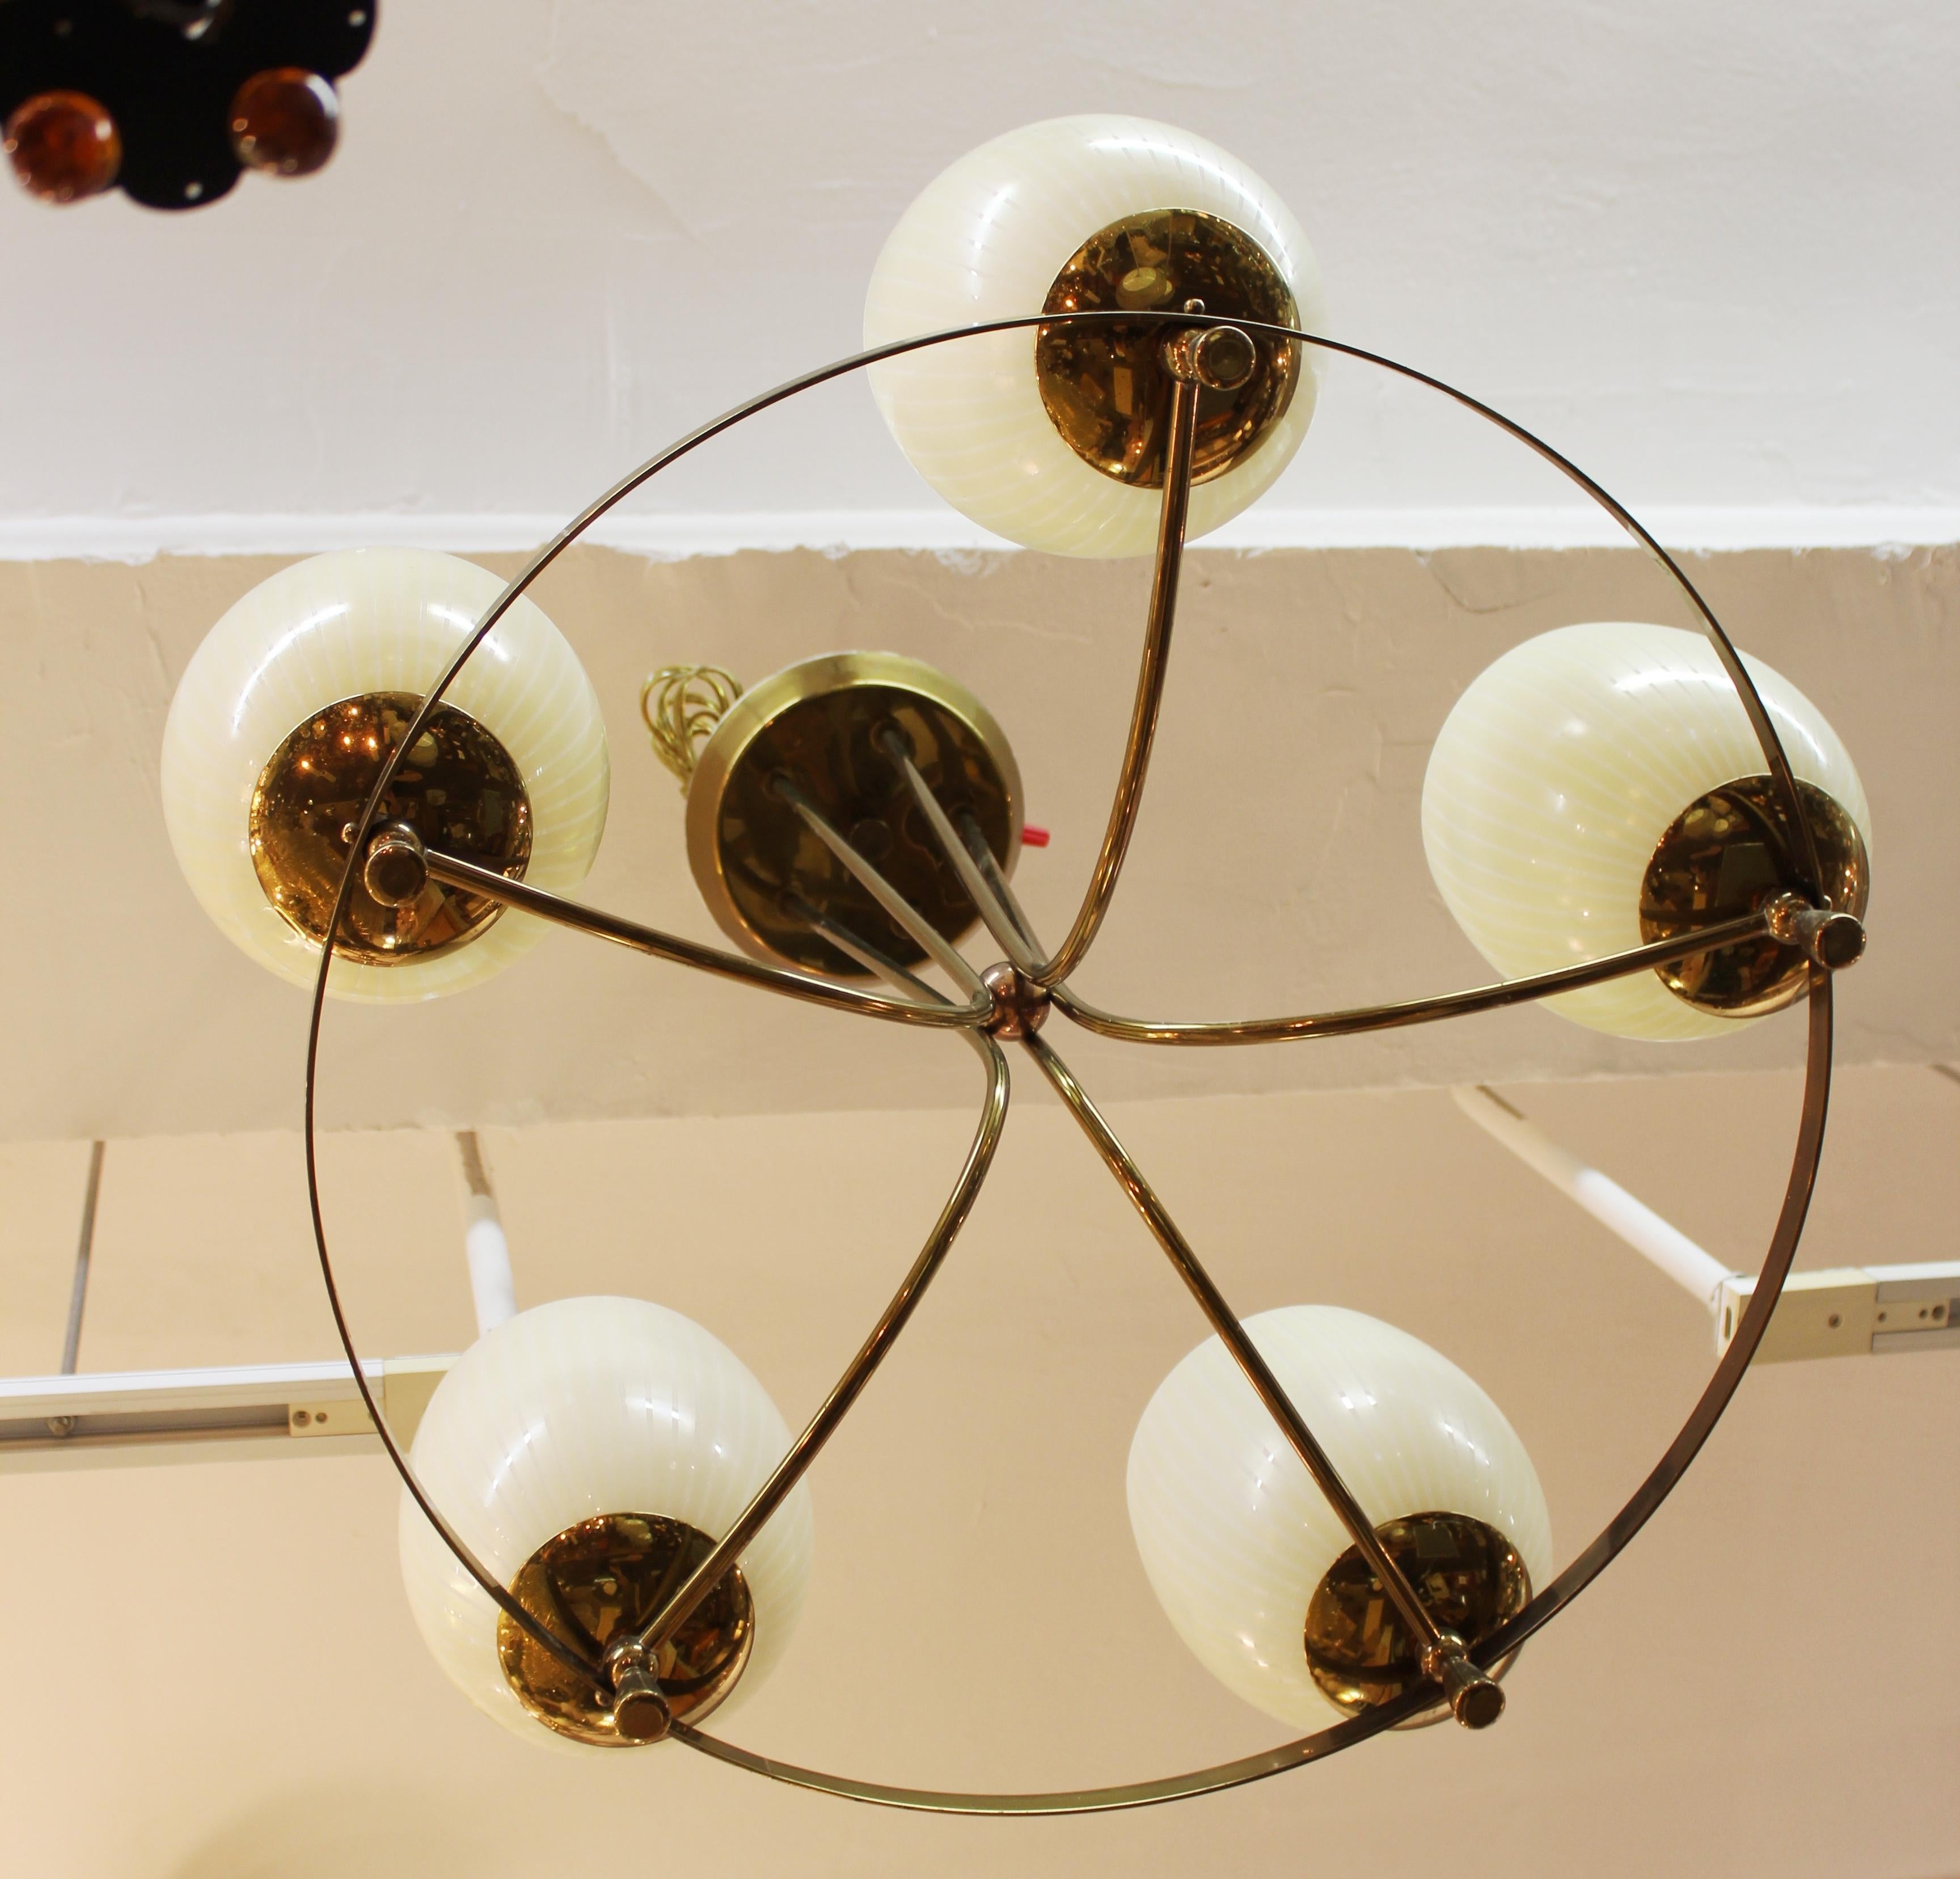 Mid-Century Modern one-tiered chandelier with circular brass structure and five arms holding open glass globes. The piece was made in Italy during the mid-20th century and has recently been rewired to fit current standards. In good vintage condition